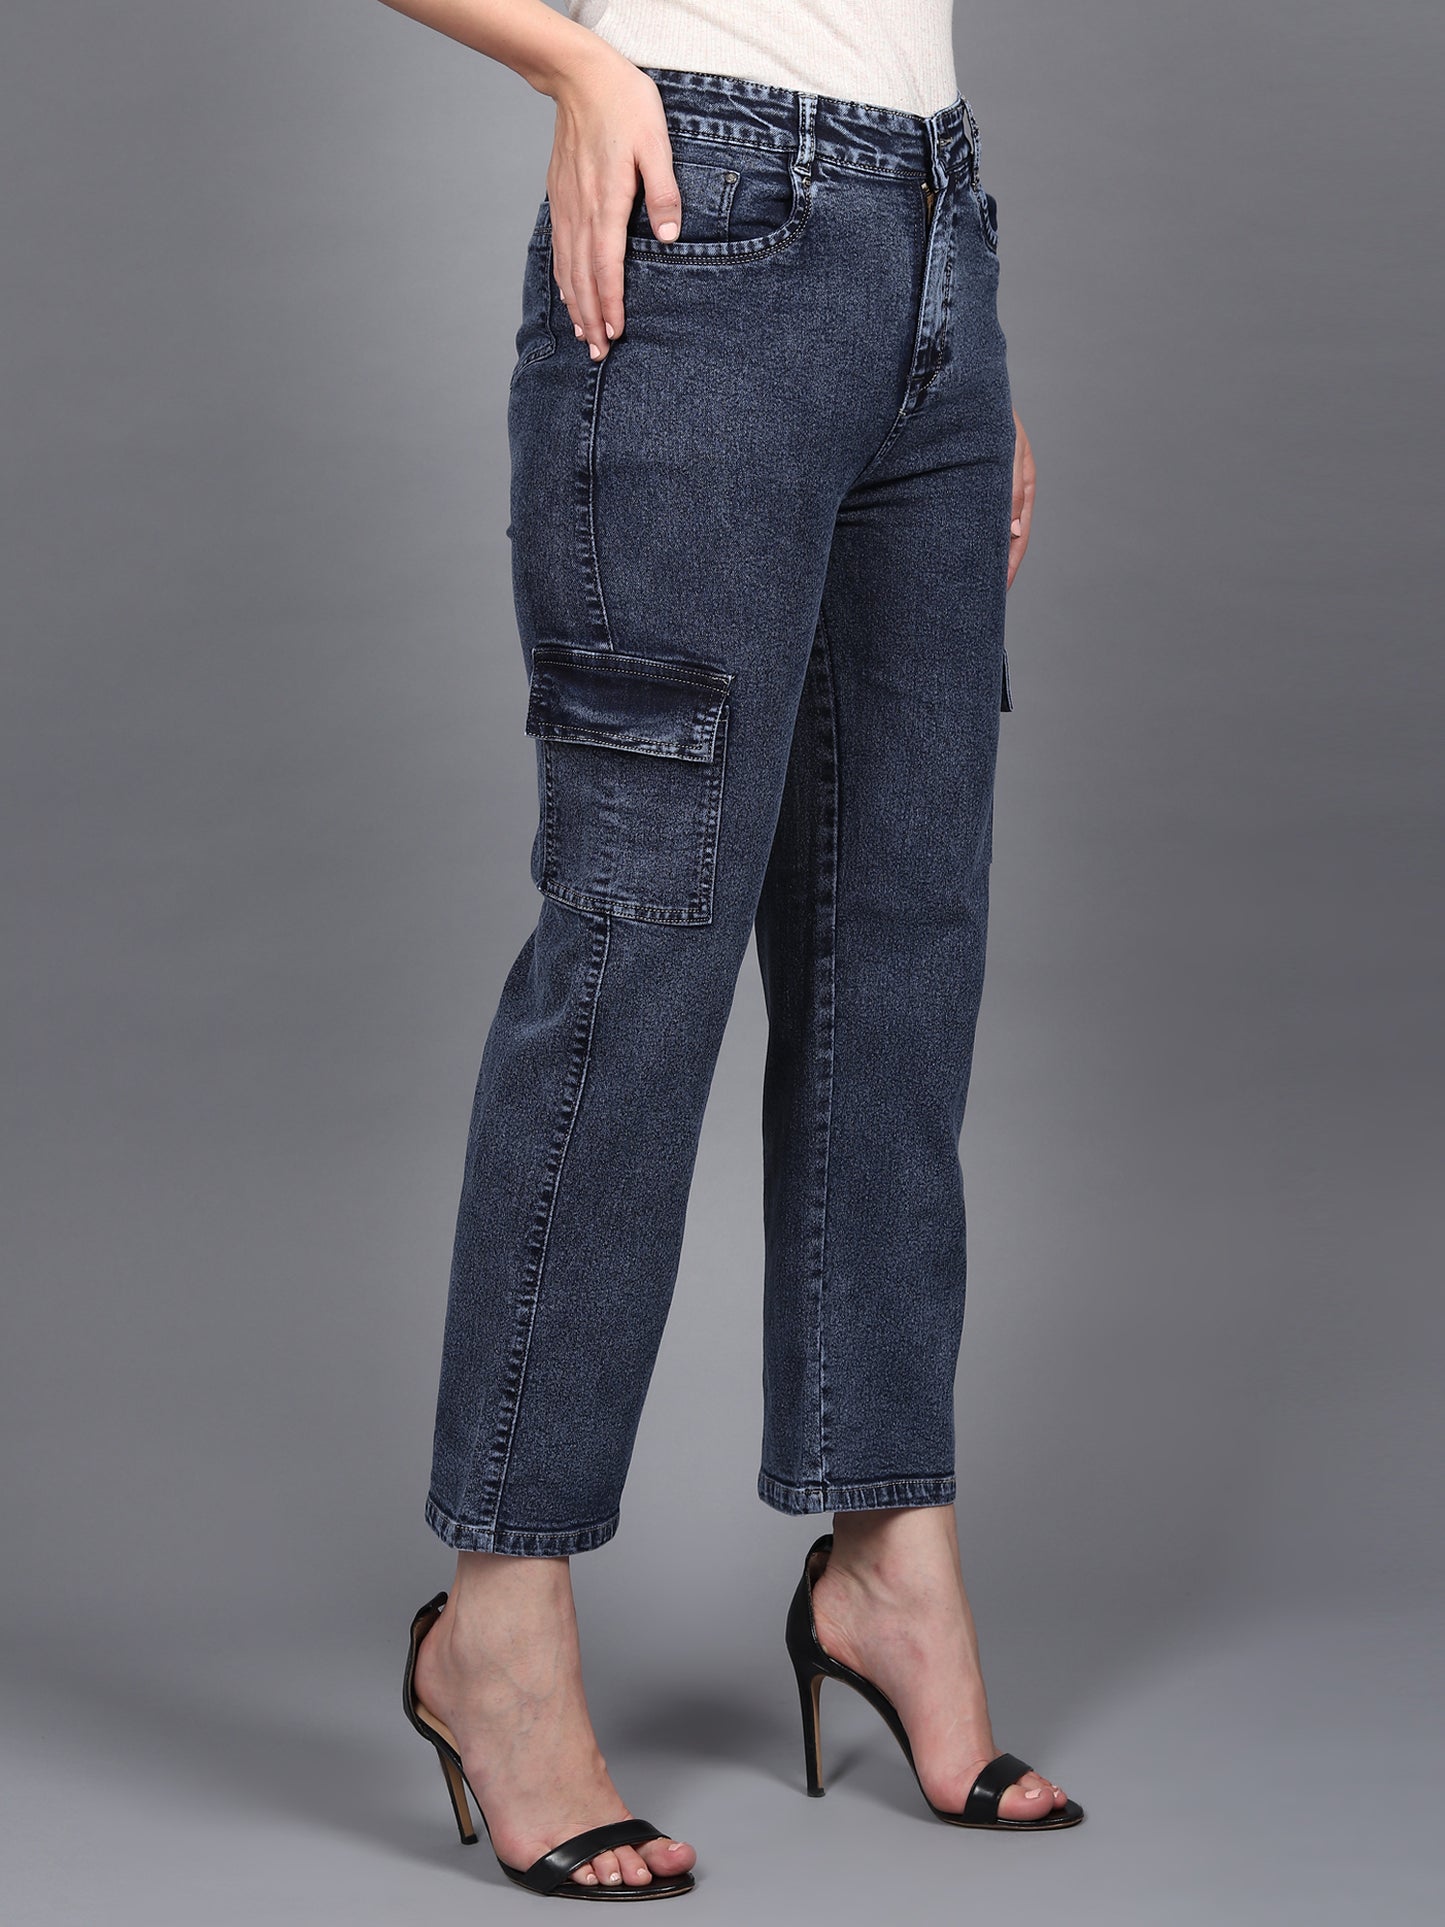 Navy Cargo Jeans For Women High Waist Straight Fit Stretchable Denim - 1214